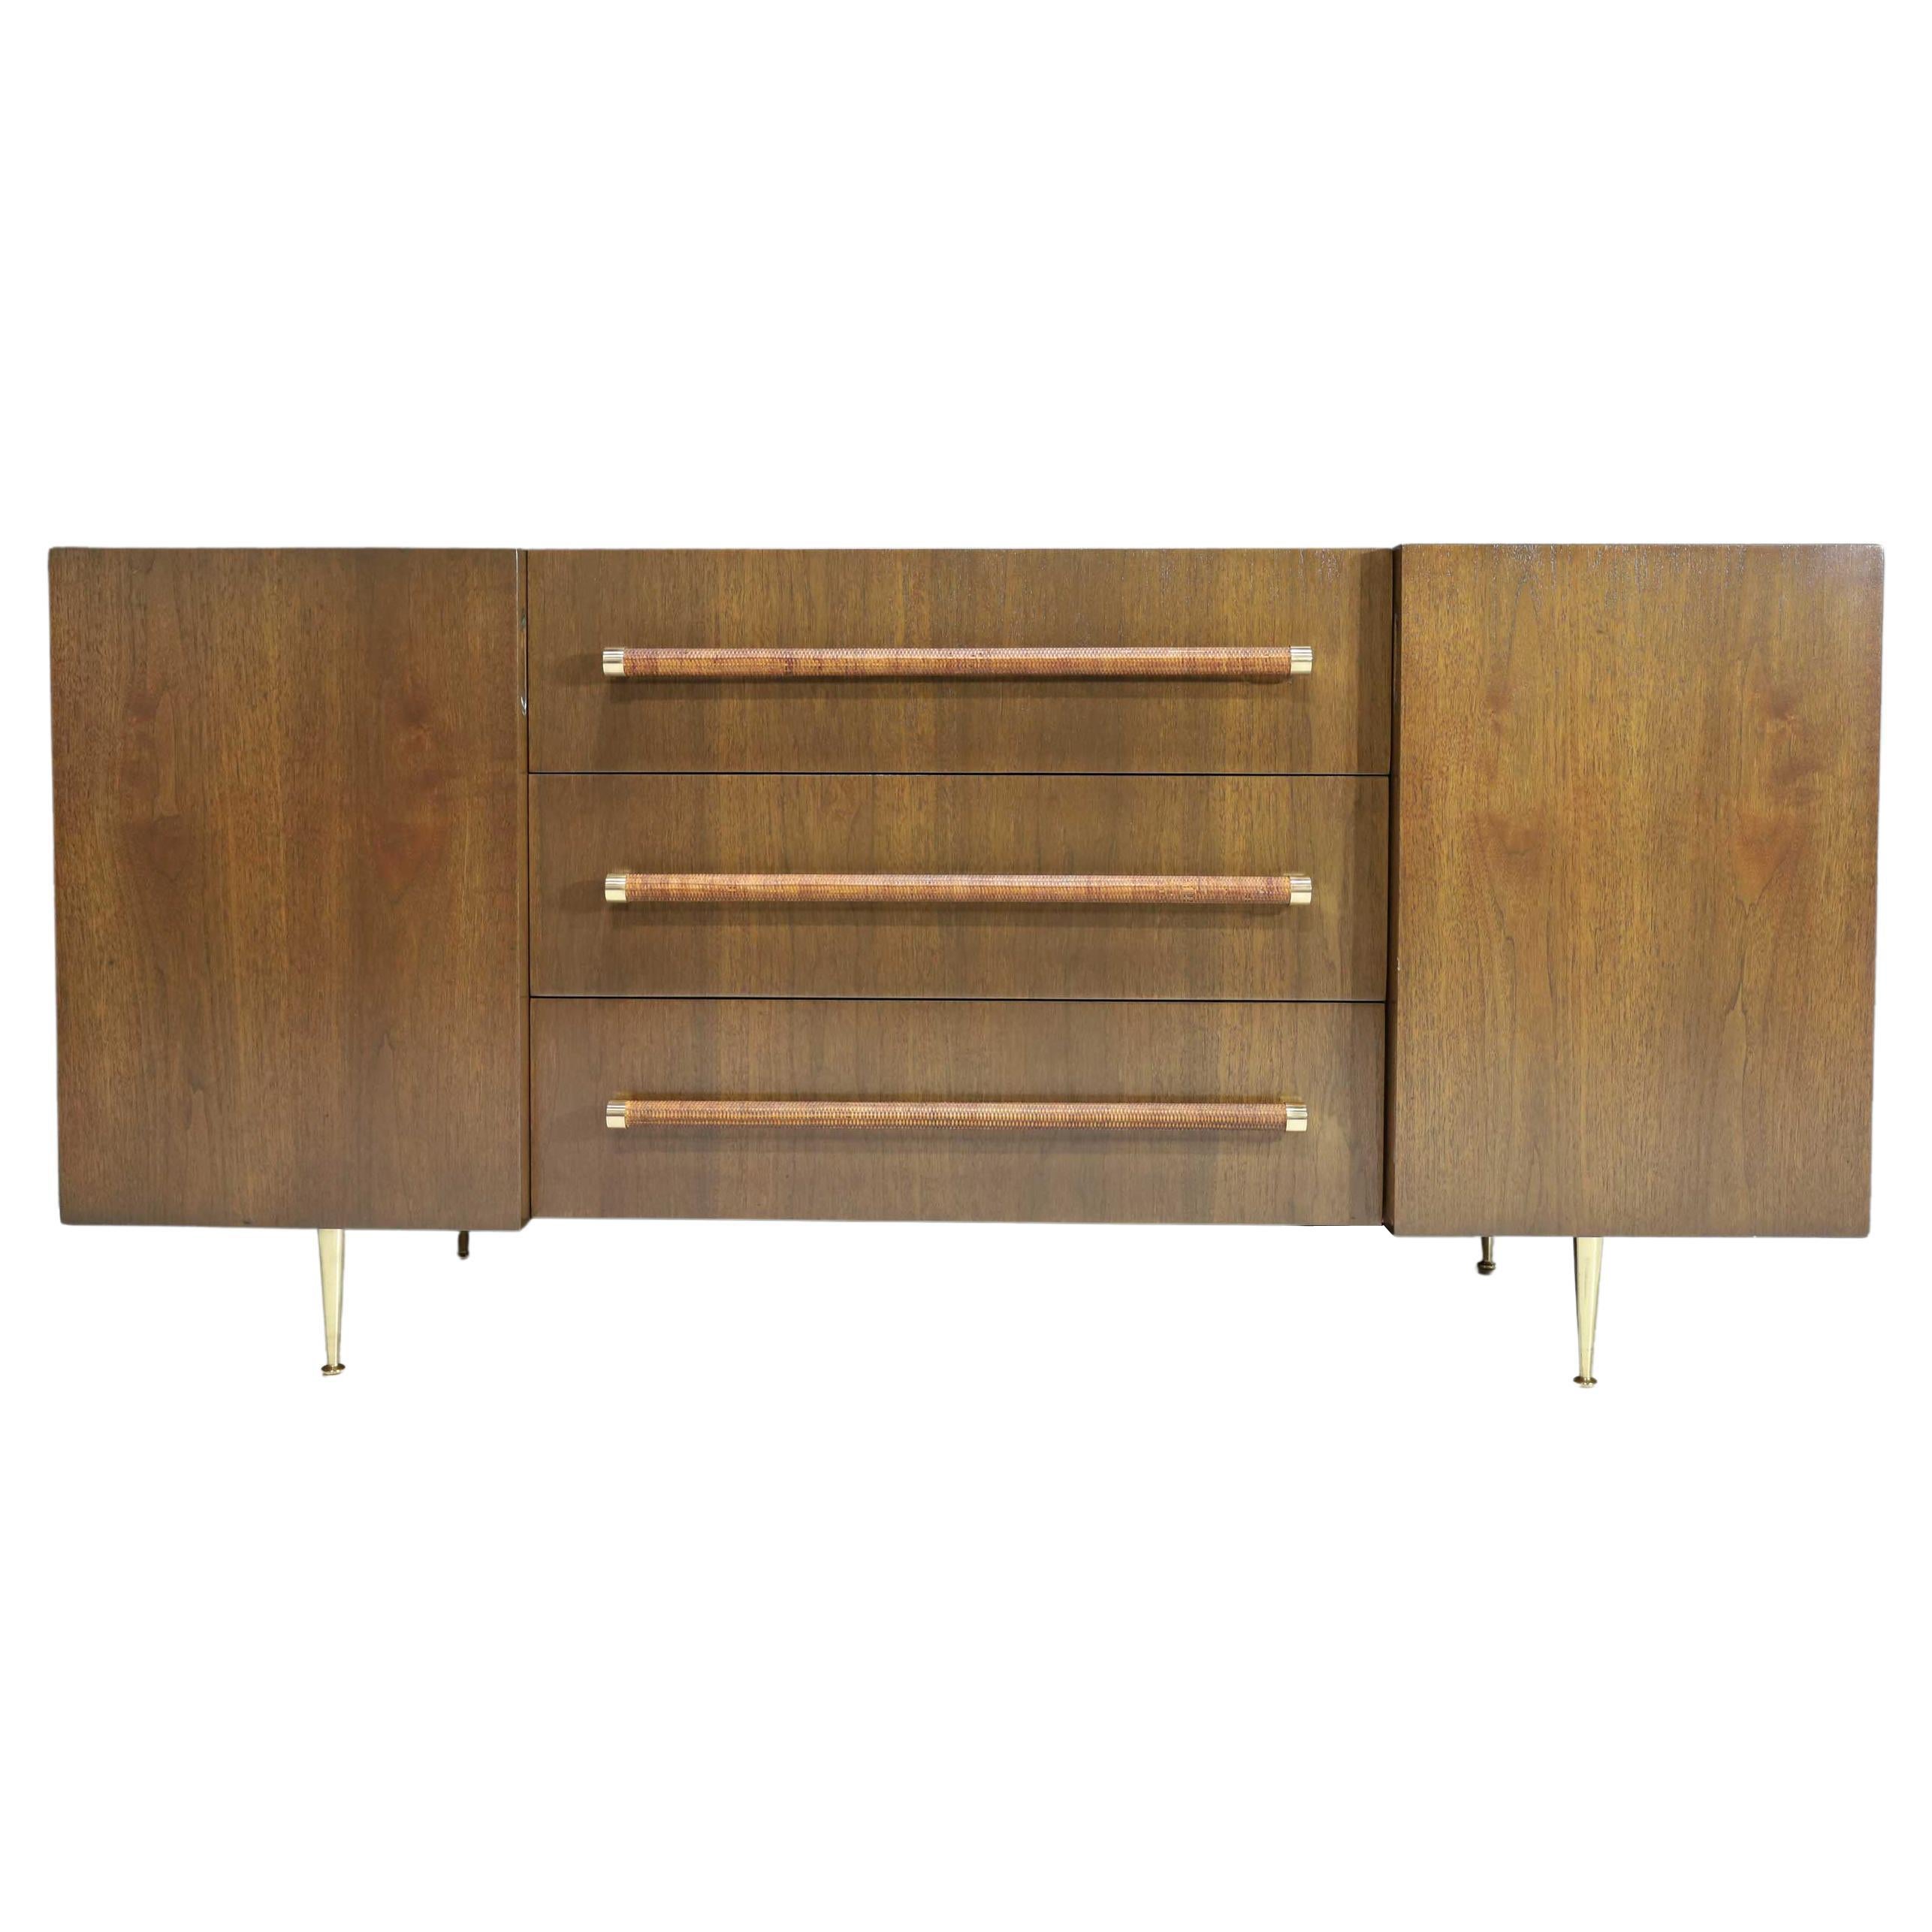 T.H. Robsjohn-Gibbings Rare Sideboard or Cabinet in Walnut, Rattan and Brass For Sale